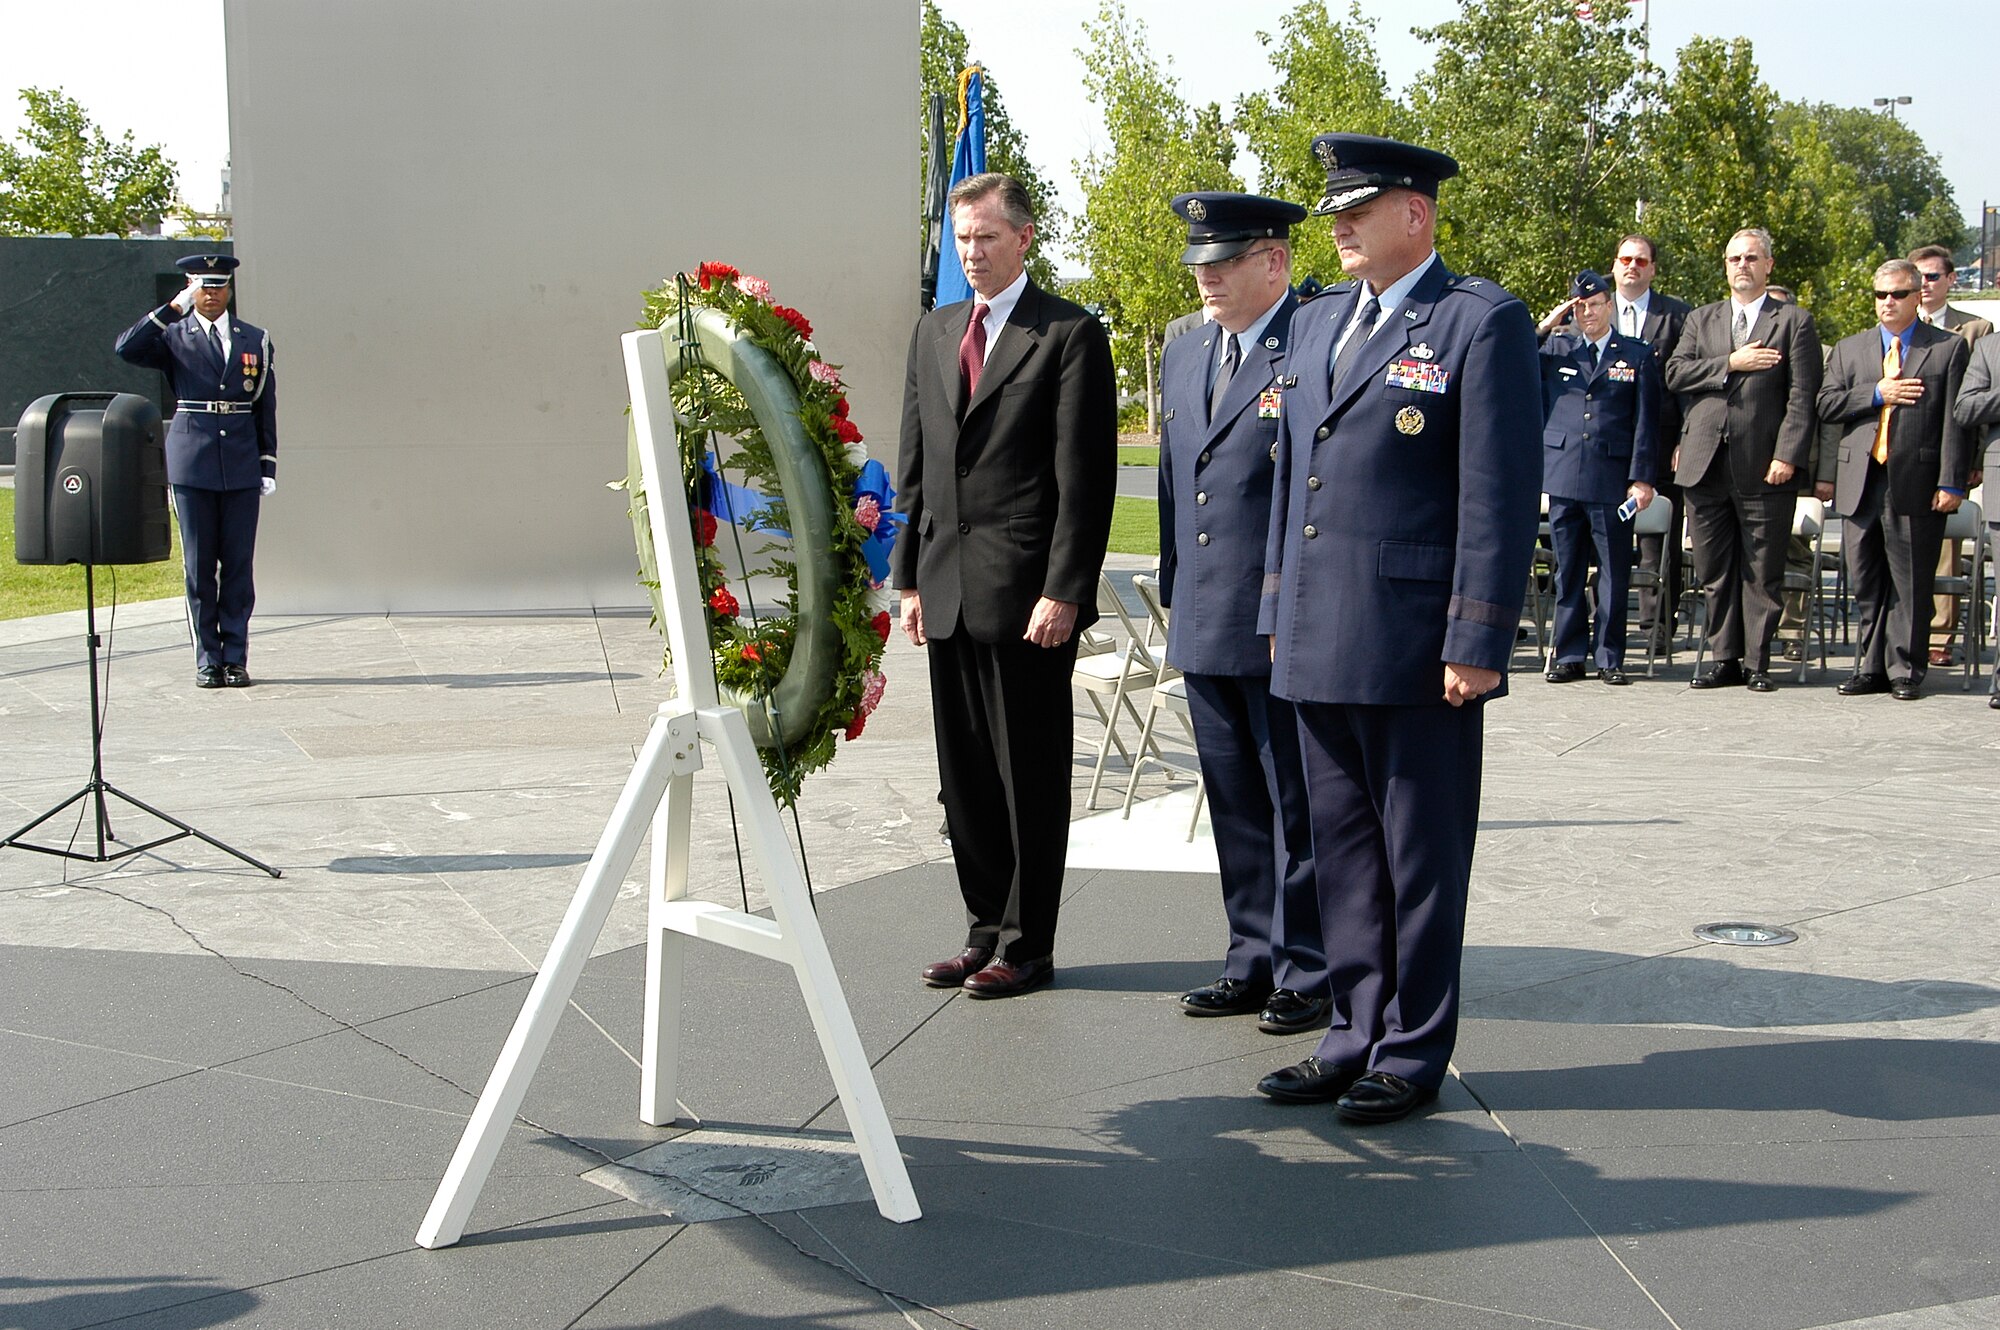 In observance of the 60th Anniversary of the Air Force Office of Special Investigations a wreath is placed at the Air Force Memorial Aug. 1. In a moment of solemn observance are (l to r) Mr. Douglas Thomas, AFOSI Executive Director, Command Chief Master Sgt. Chris Redmond, AFOSI Command Chief and Brig. Gen. Dana Simmons, AFOSI commander. (U.S. Air Force photo/Tech. Sgt. John Jung)